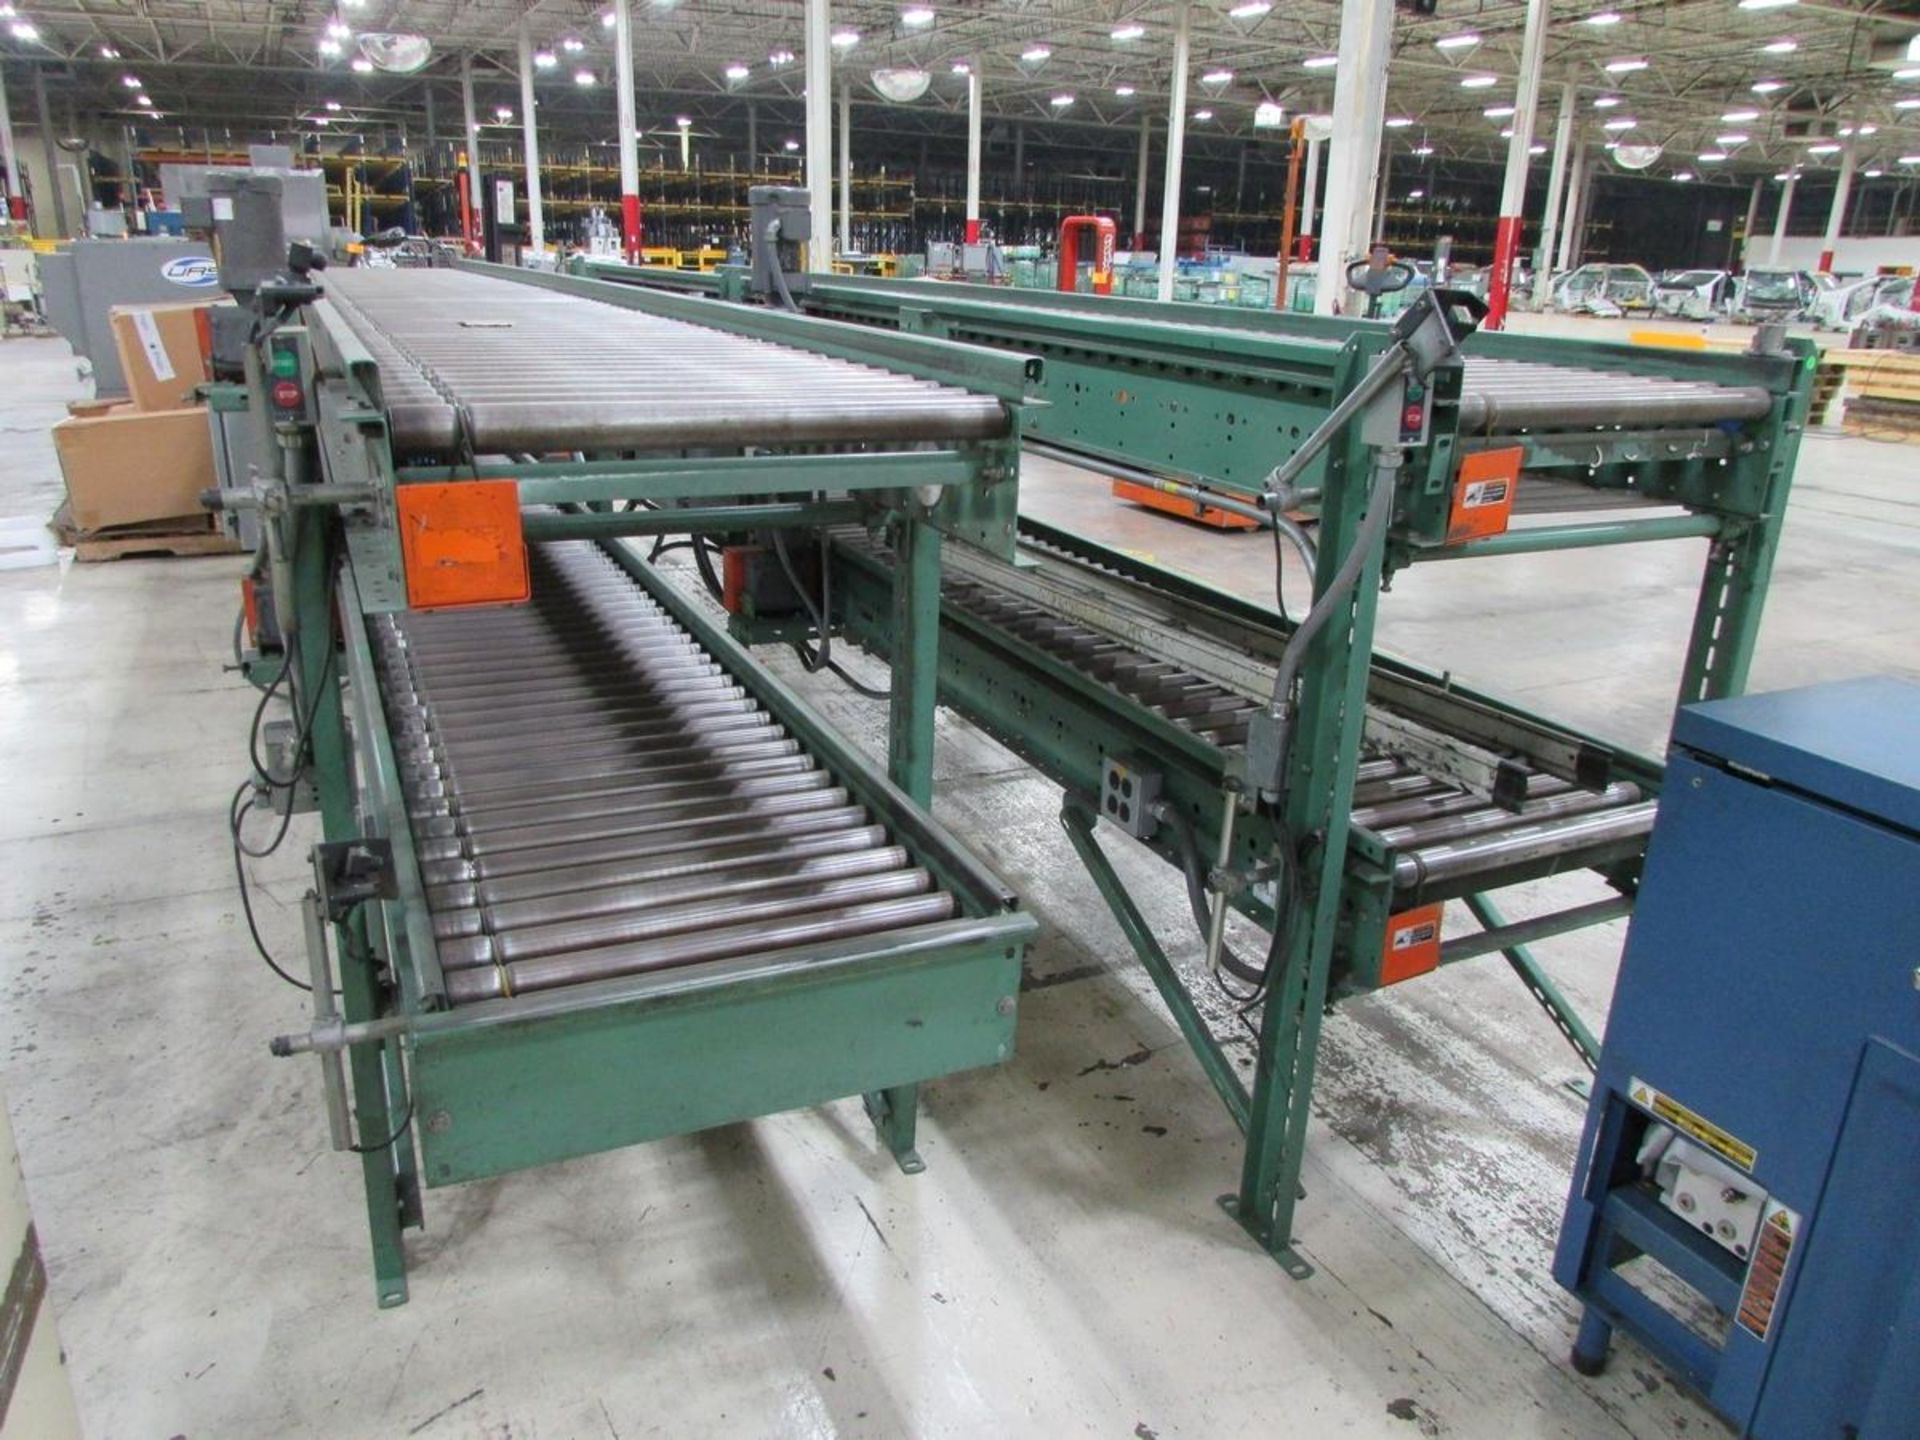 Roach Conveyors (2) 17'x2' Double Deck Powered Roller Conveyor Sections - Image 2 of 6